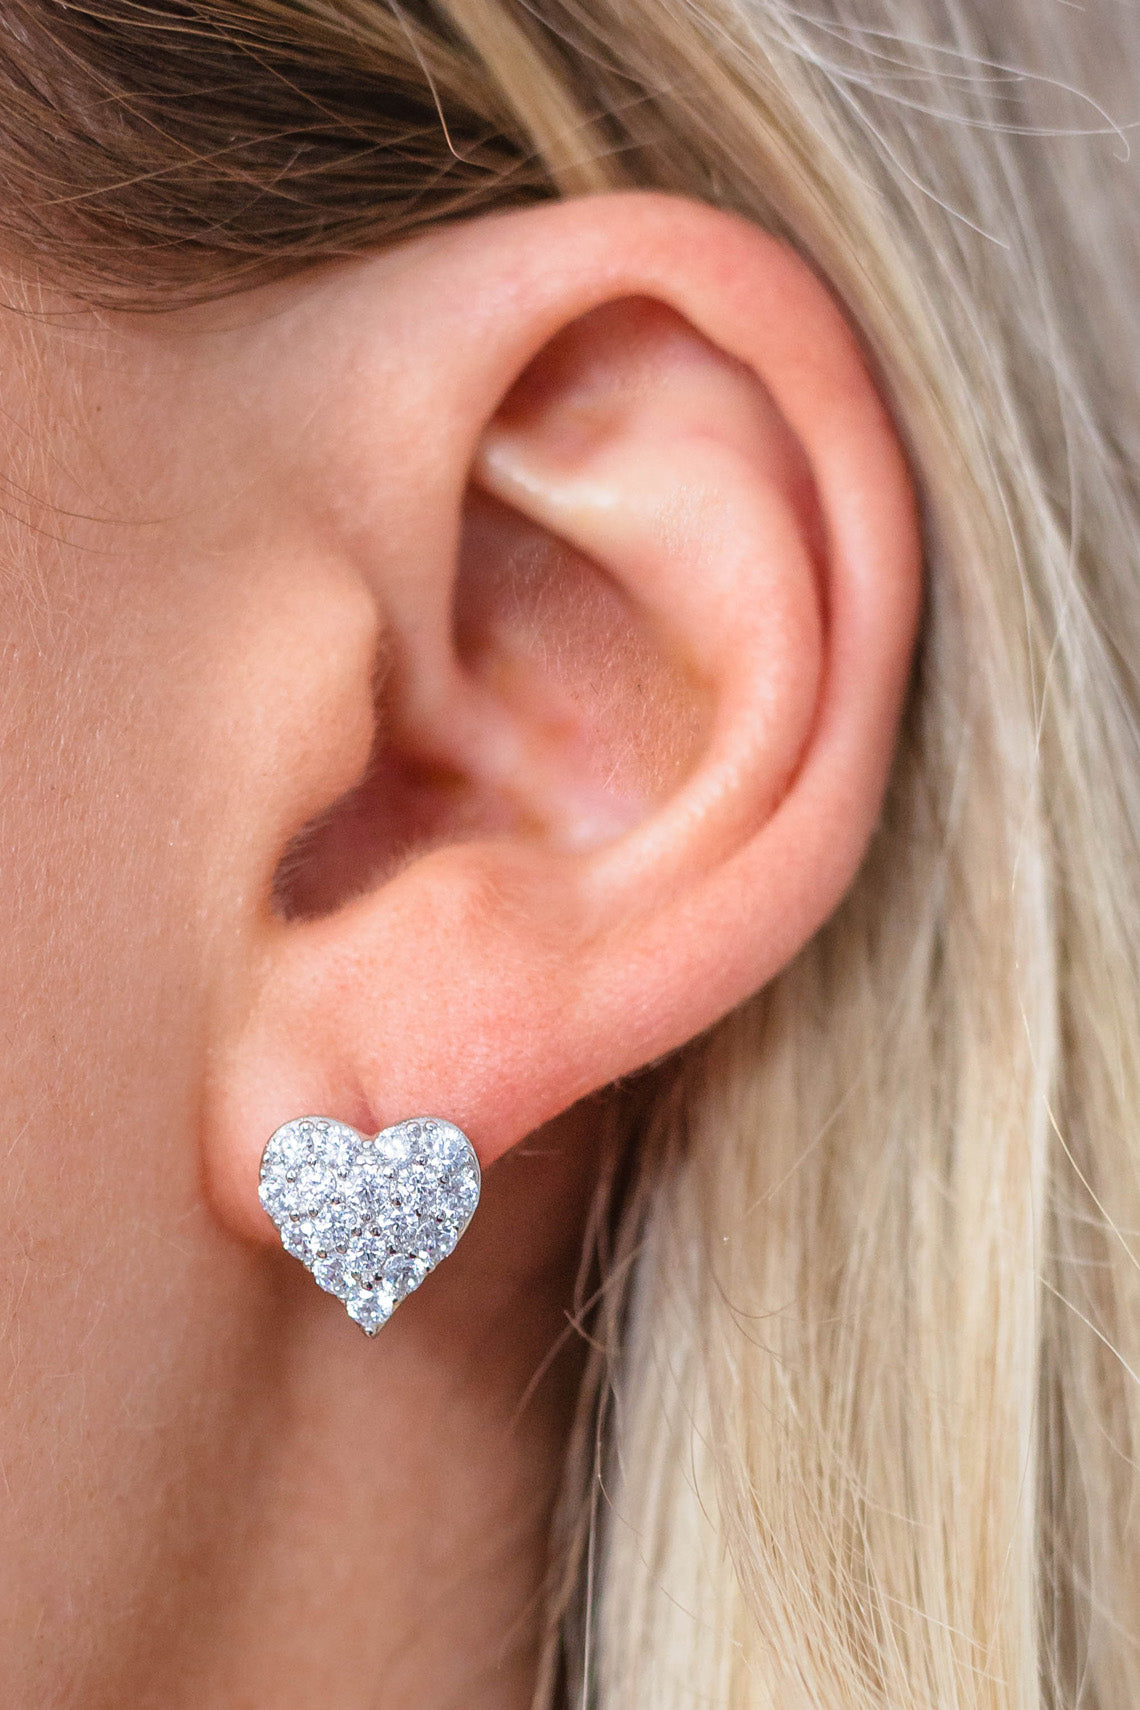 SWEETHEART SPARKLY HEART STUDS SILVER